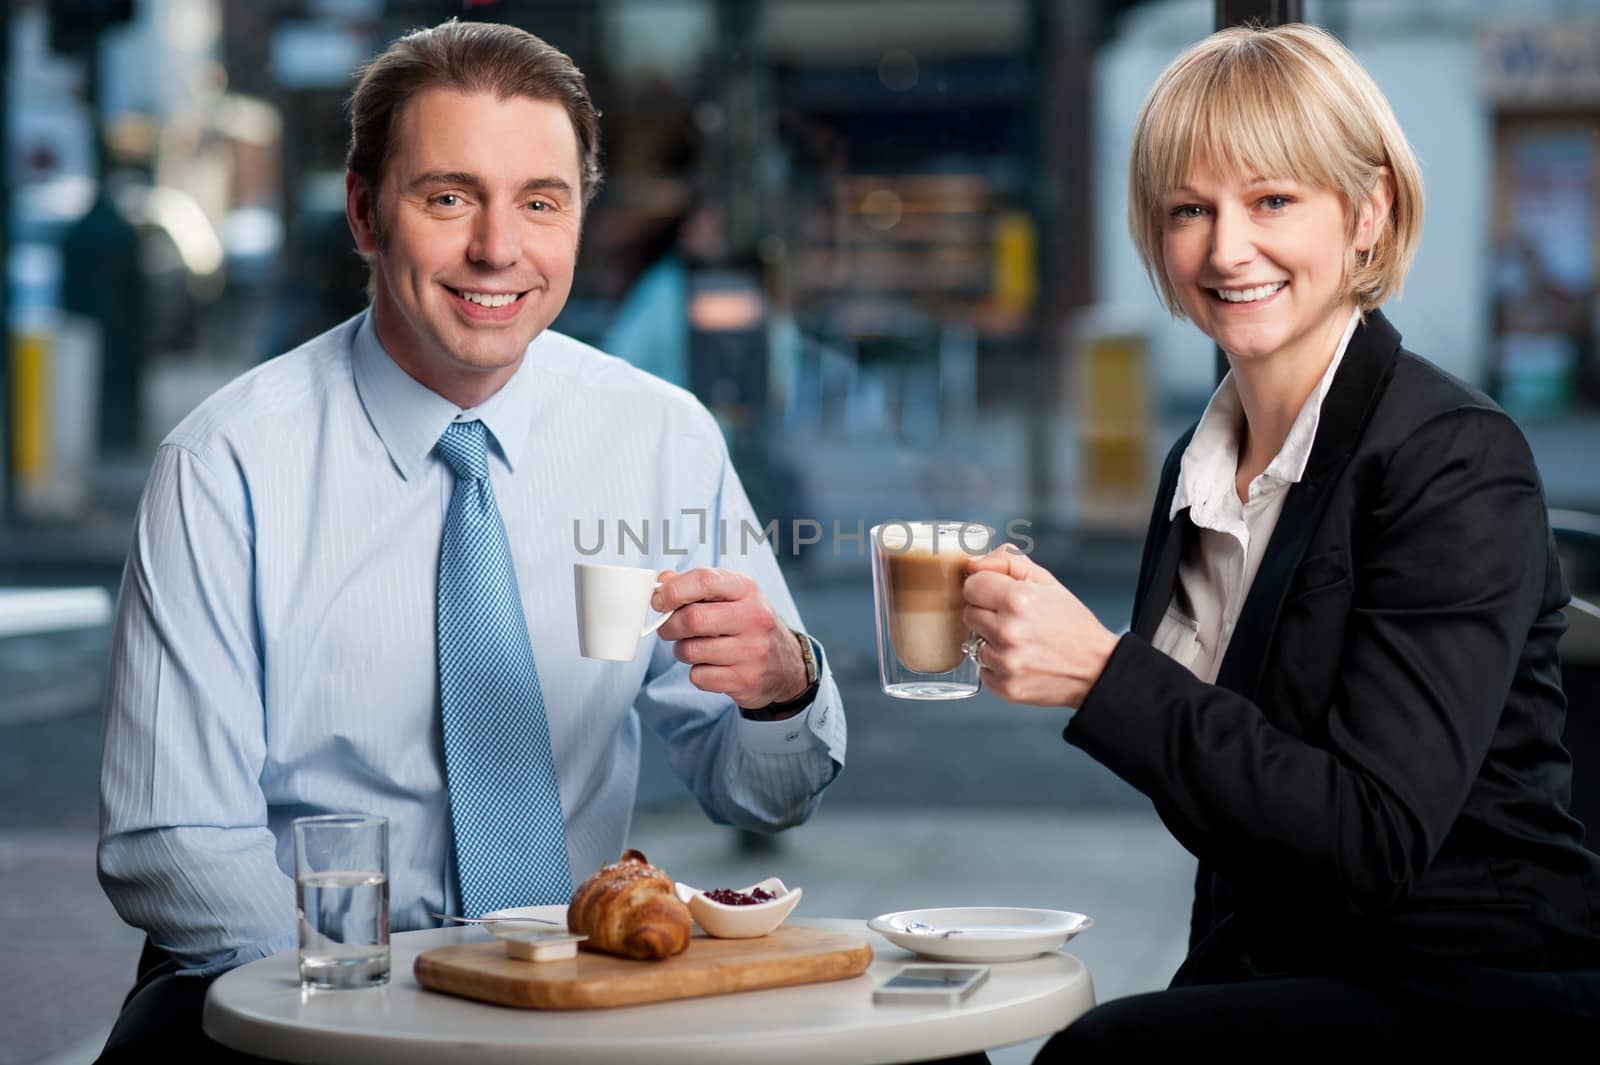 Two corporates discussing business over snacks by stockyimages